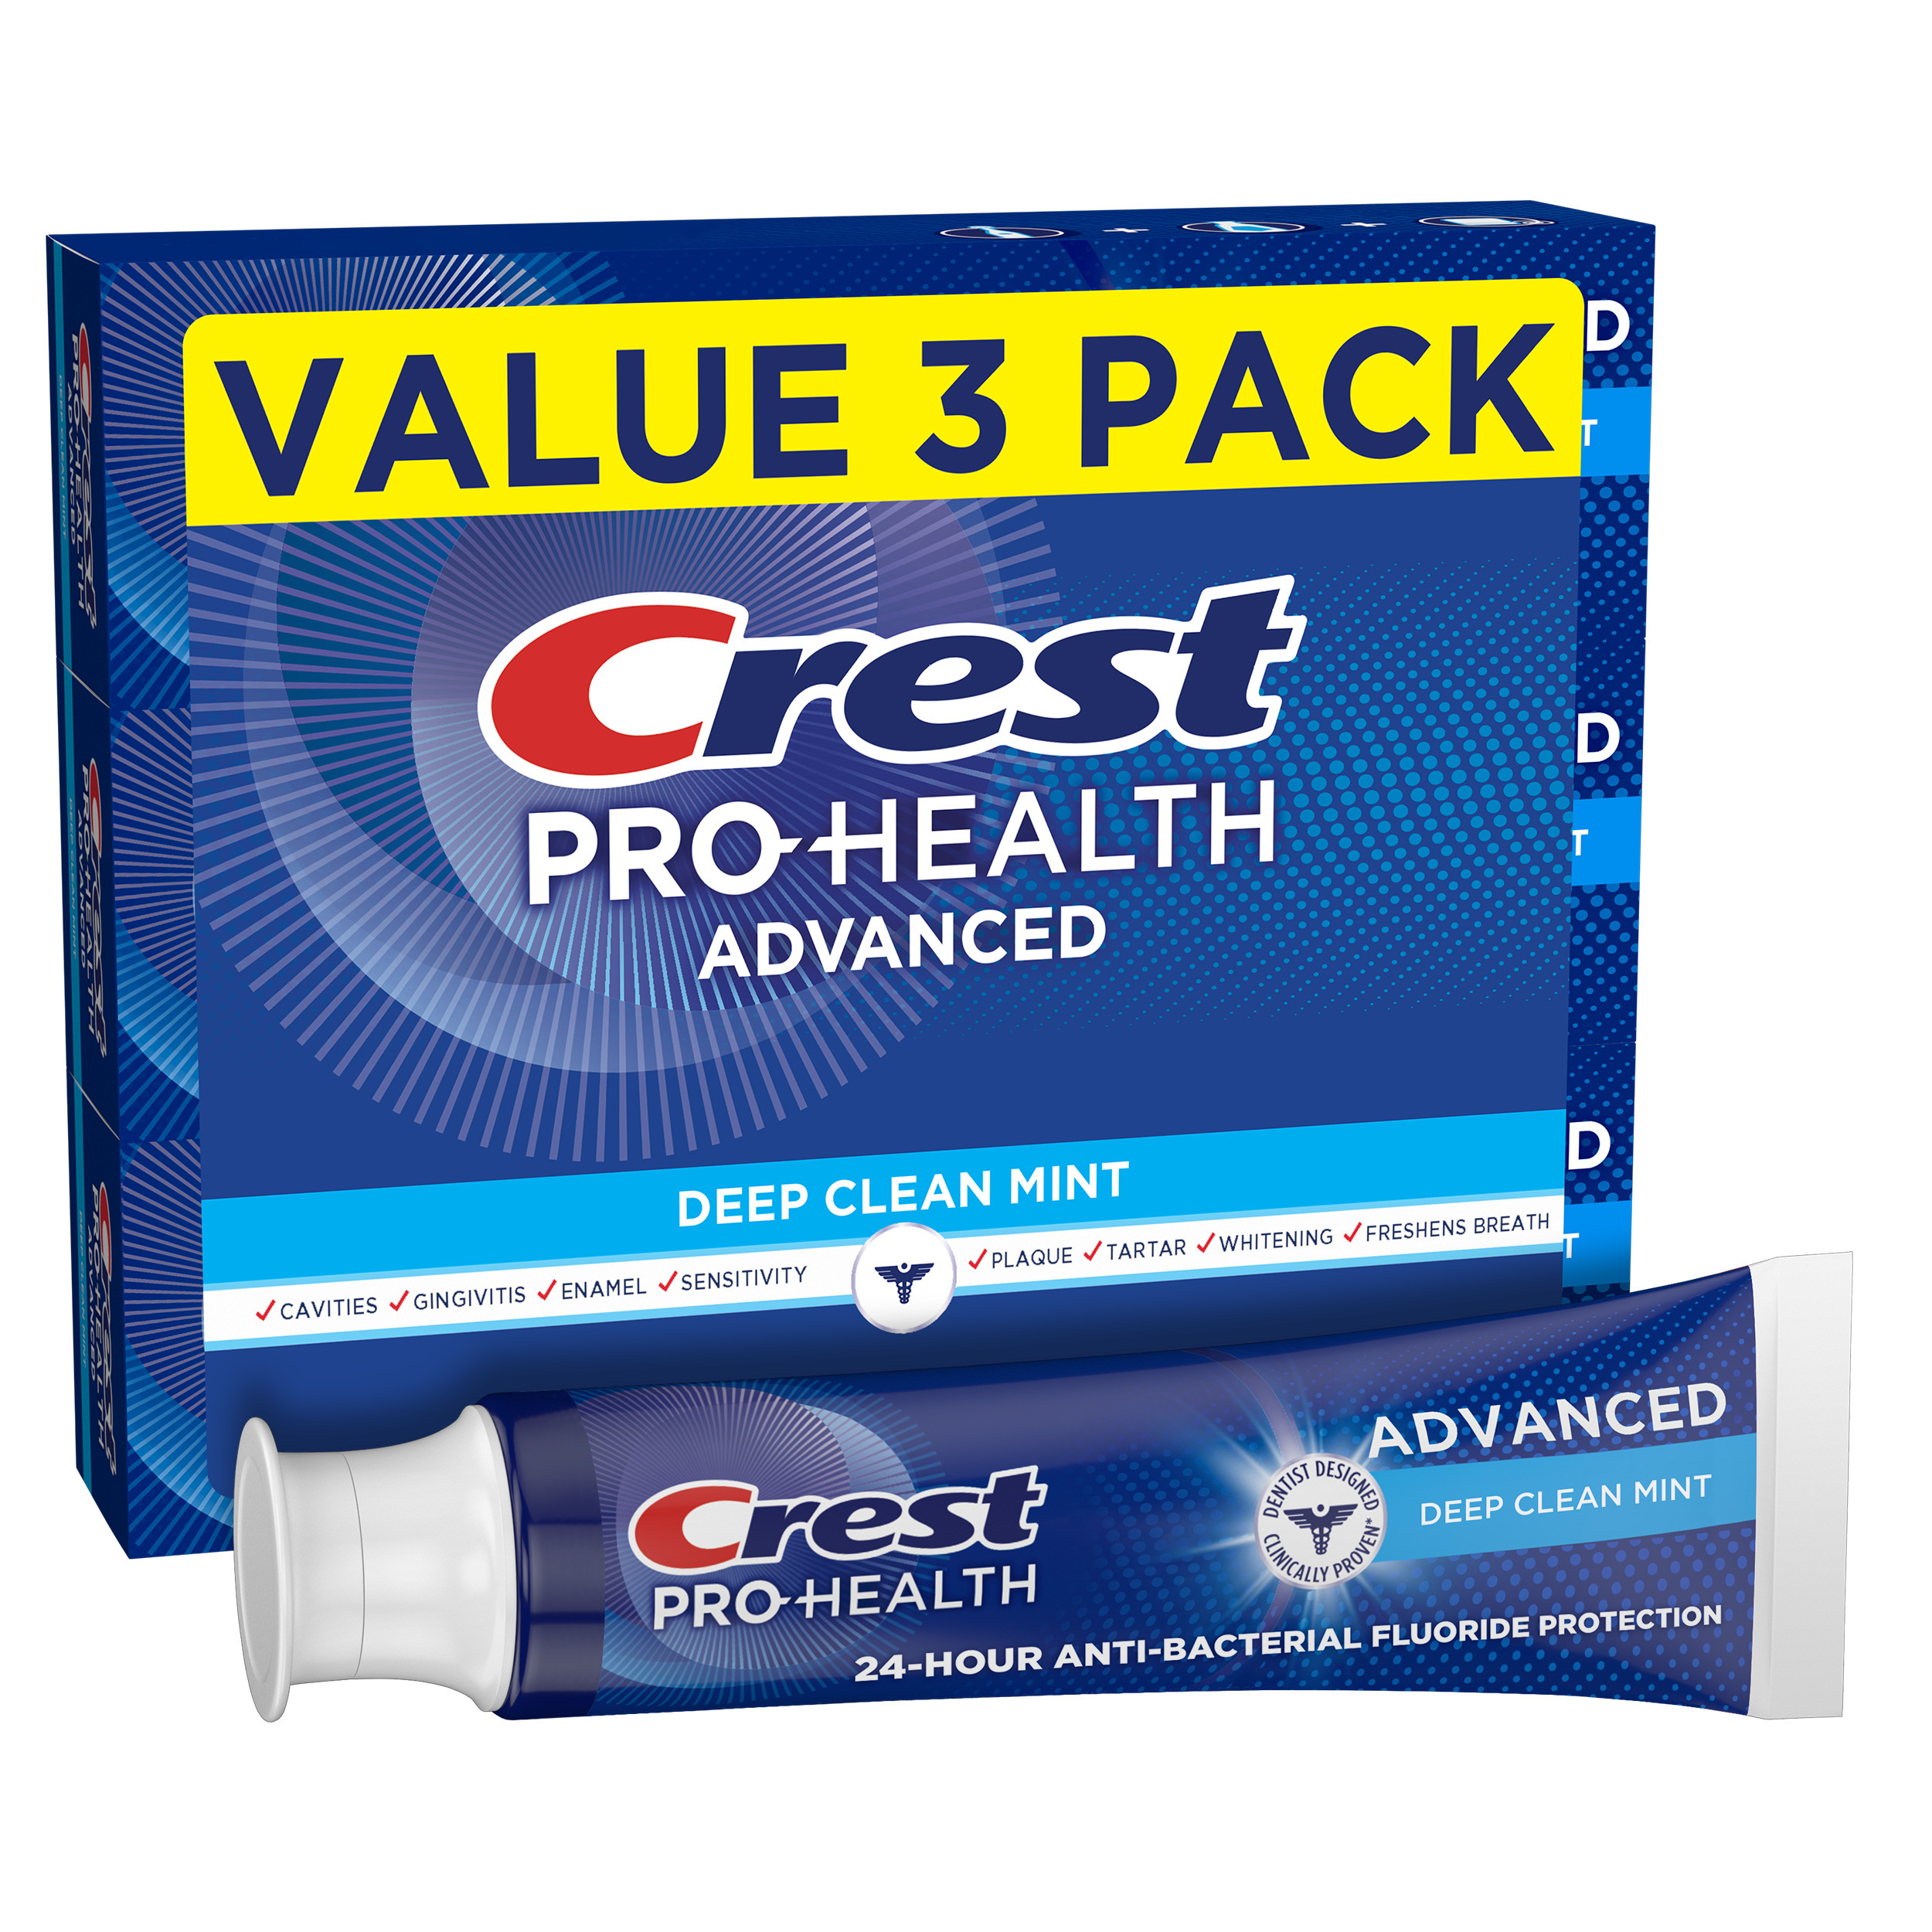 Crest Pro Health Advanced Deep Clean Toothpaste, Mint, 5.1 oz, 3 Pack - image 1 of 8